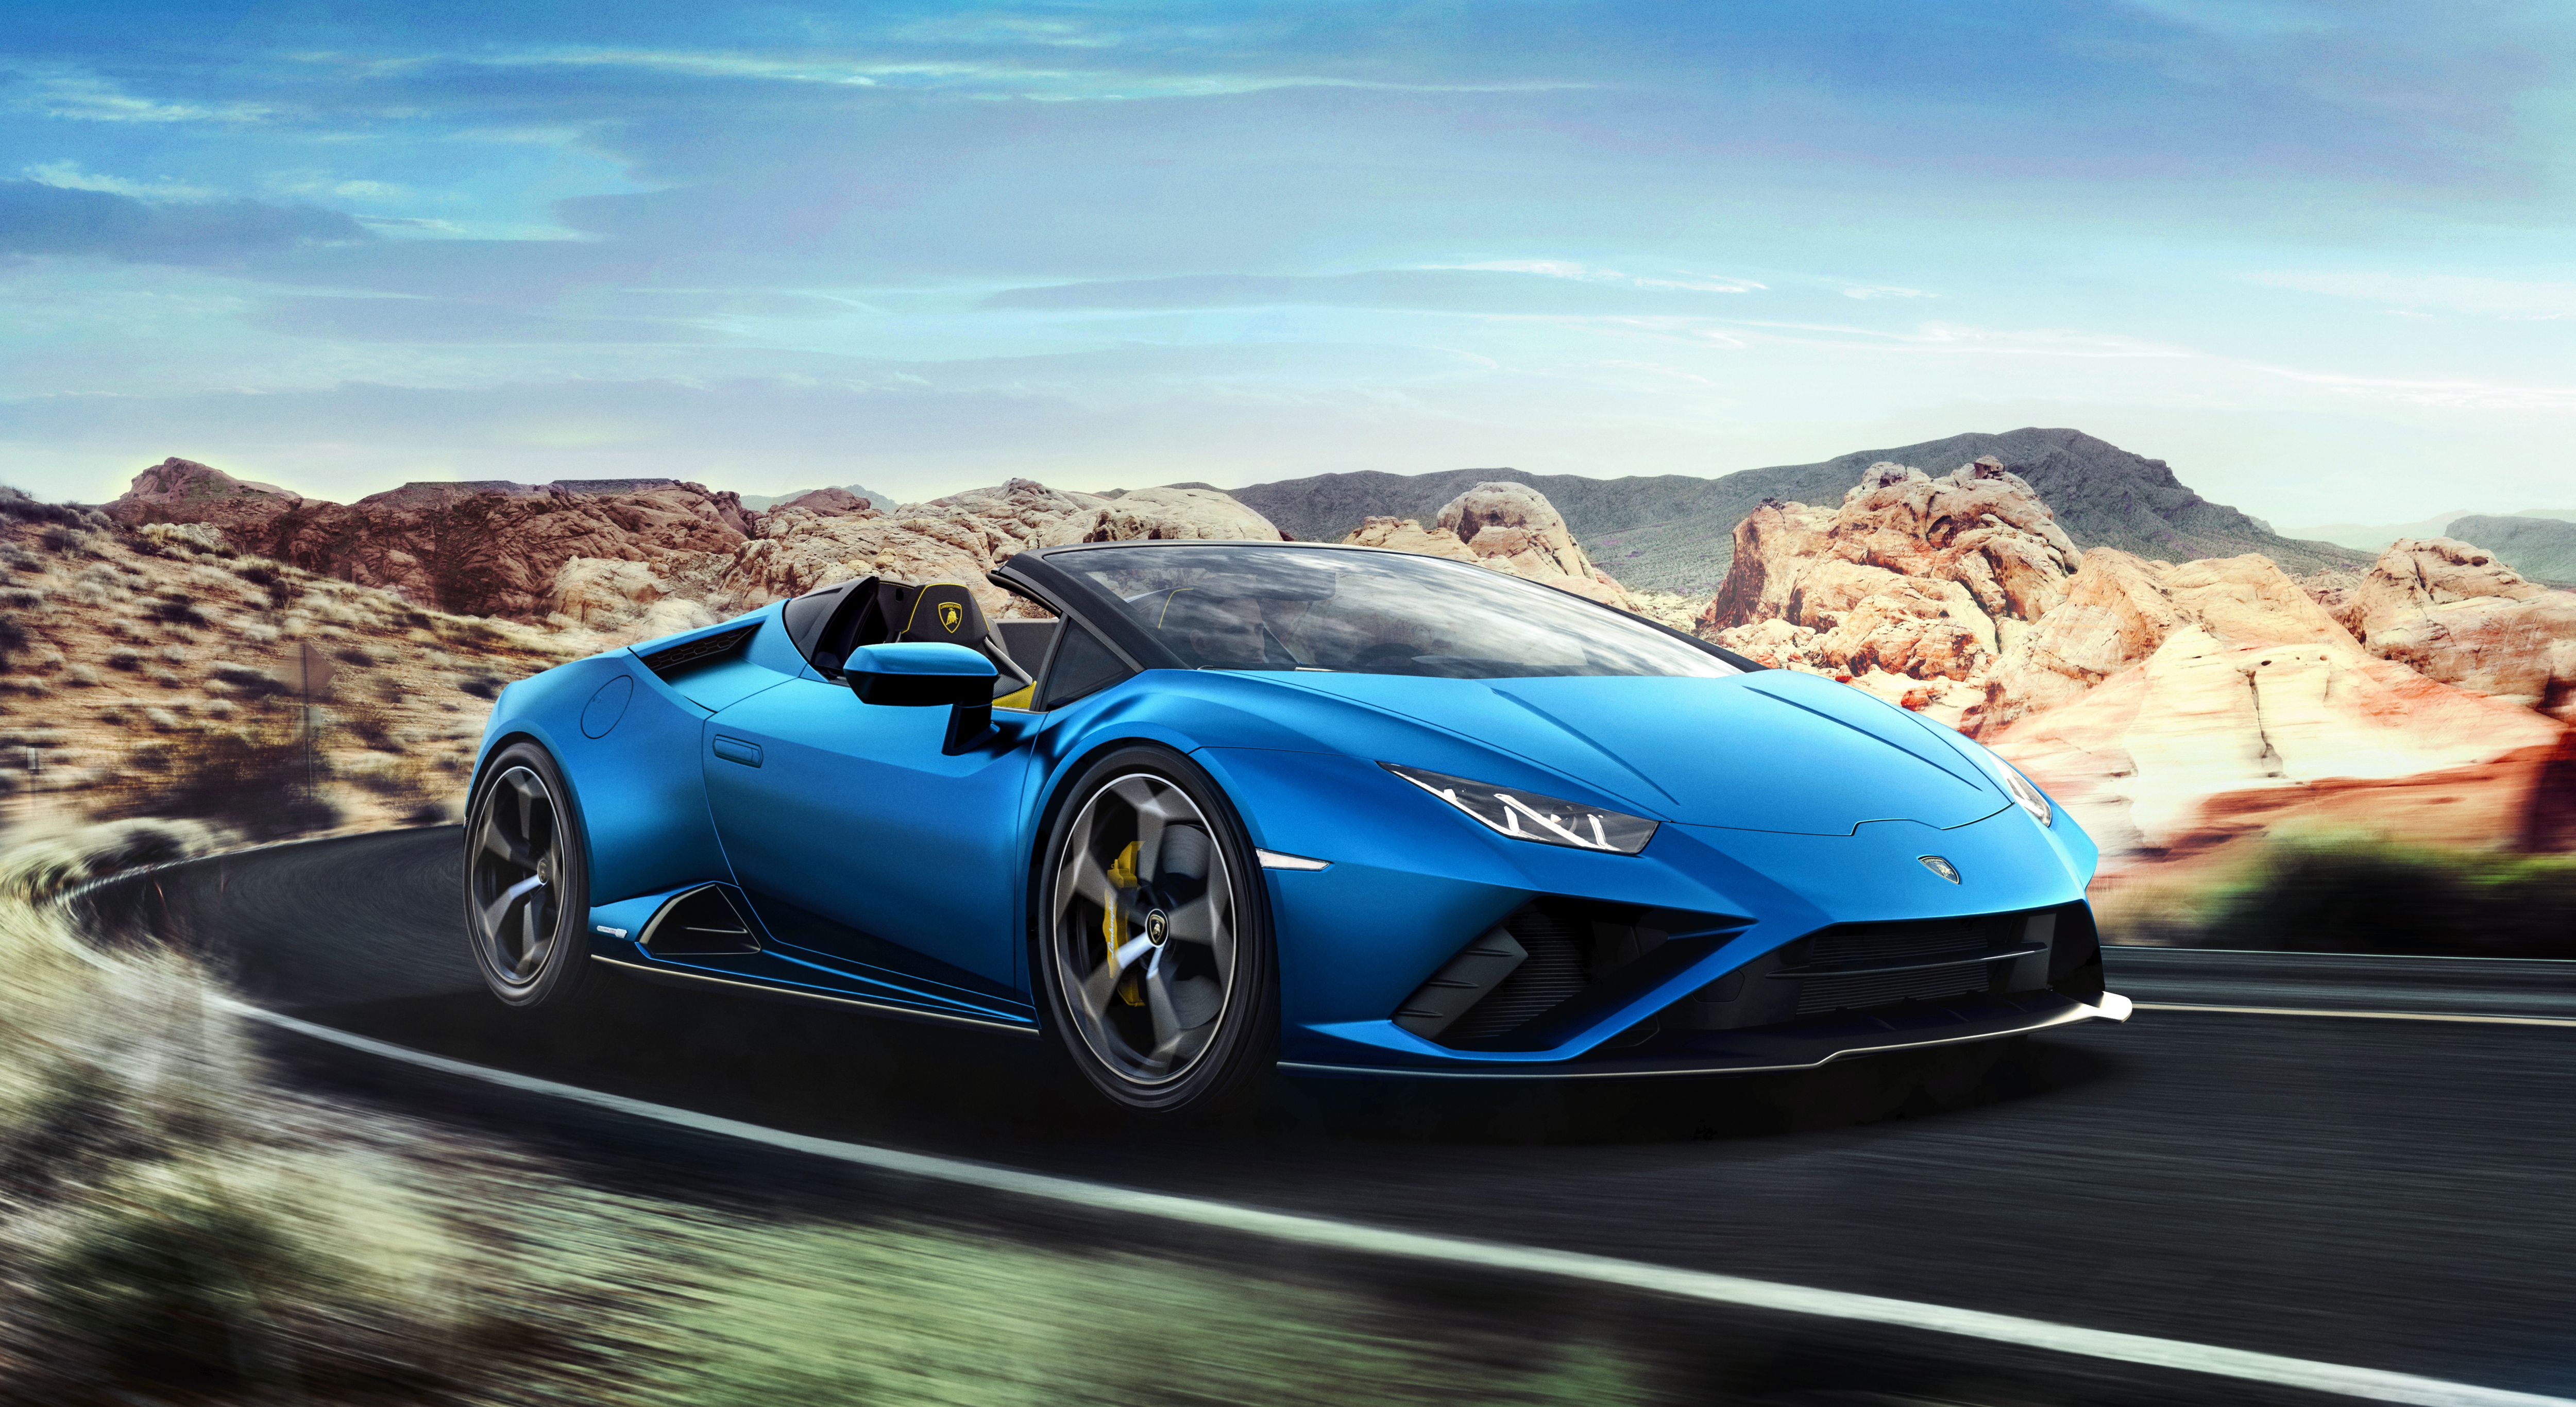 2021 How Much Does a Lamborghini Cost?